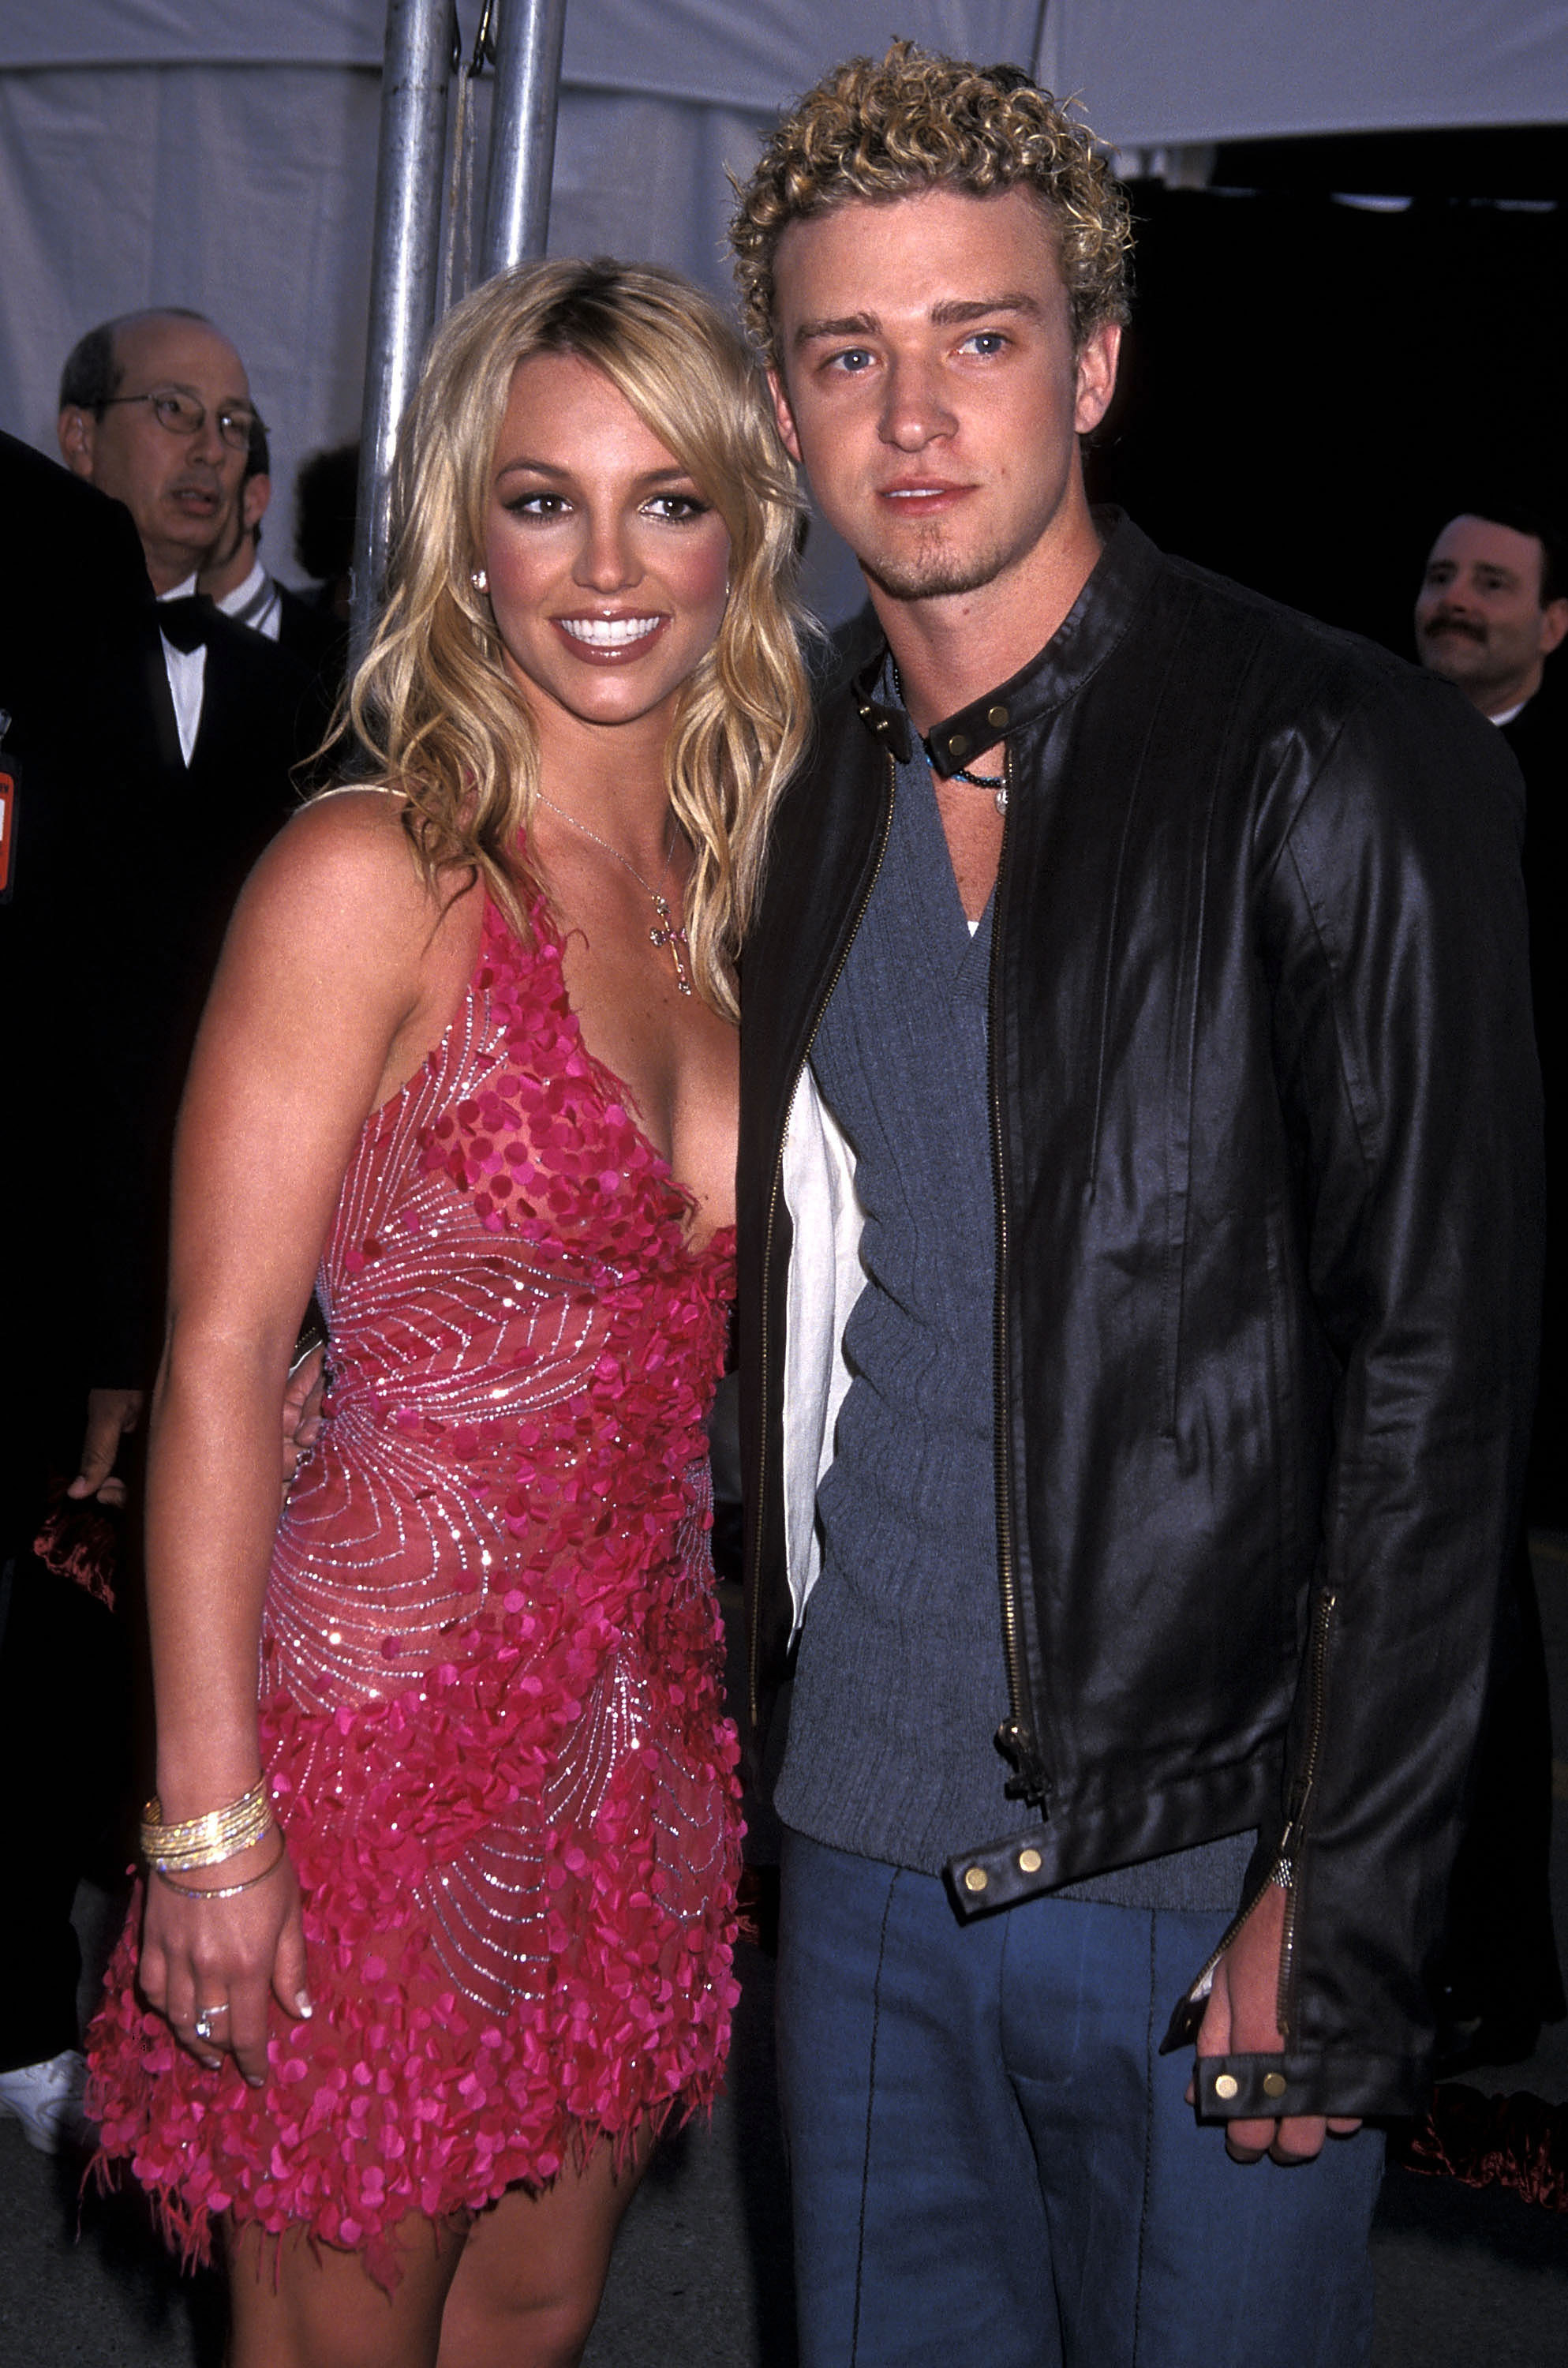 <p>This super-messy breakup involving former Hollywood sweethearts <a href="https://www.wonderwall.com/celebrity/profiles/overview/britney-spears-246.article">Britney Spears</a> and <a href="https://www.wonderwall.com/celebrity/profiles/overview/justin-timberlake-324.article">Justin Timberlake</a> has gone down in music history. In 2002, the It couple called it quits after four years together when Justin reportedly found a note in Britney's room that revealed she was cheating on him with choreographer Wade Robson. Later that year, Justin famously released "Cry Me a River" -- a track he reportedly wrote just two hours after he and Britney split. "I've been scorned. ... The feelings I had were so strong I had to write it," he recalled in his 2018 autobiography "Hindsight." The music video for the song was released in April 2003 and depicted Justin cheating on a Britney look-alike in her own home. Years after their split, Justin made his disdain for his ex abundantly clear -- in the past, the "What Goes Around" singer (another song reportedly inspired by Brit) has made crass comments about their sex life and taken digs at her film career. </p>